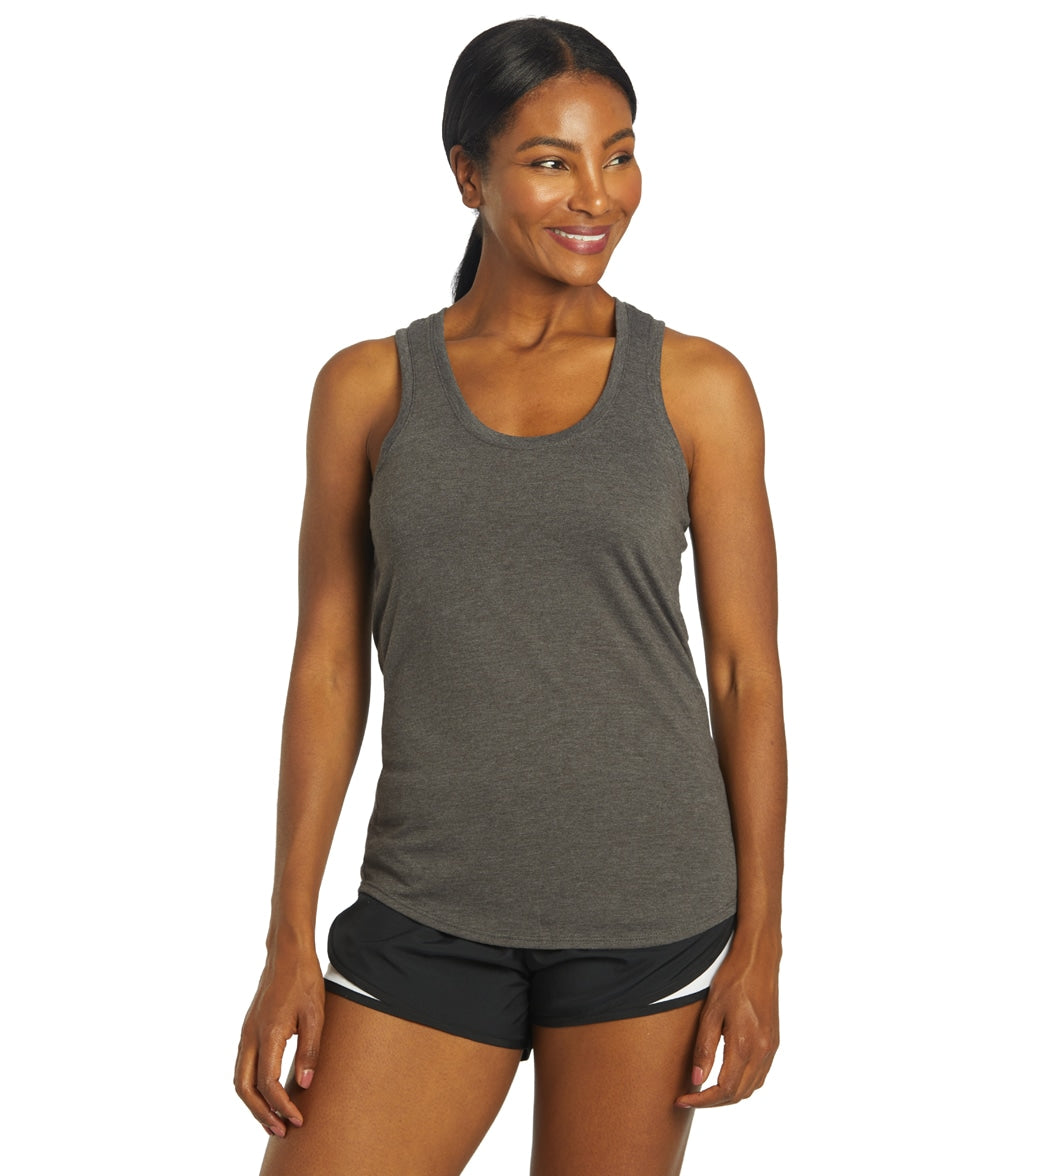 Women's Perfect Tri Racerback Tank Top - Heathered Charcoal 2Xl Cotton/Polyester - Swimoutlet.com